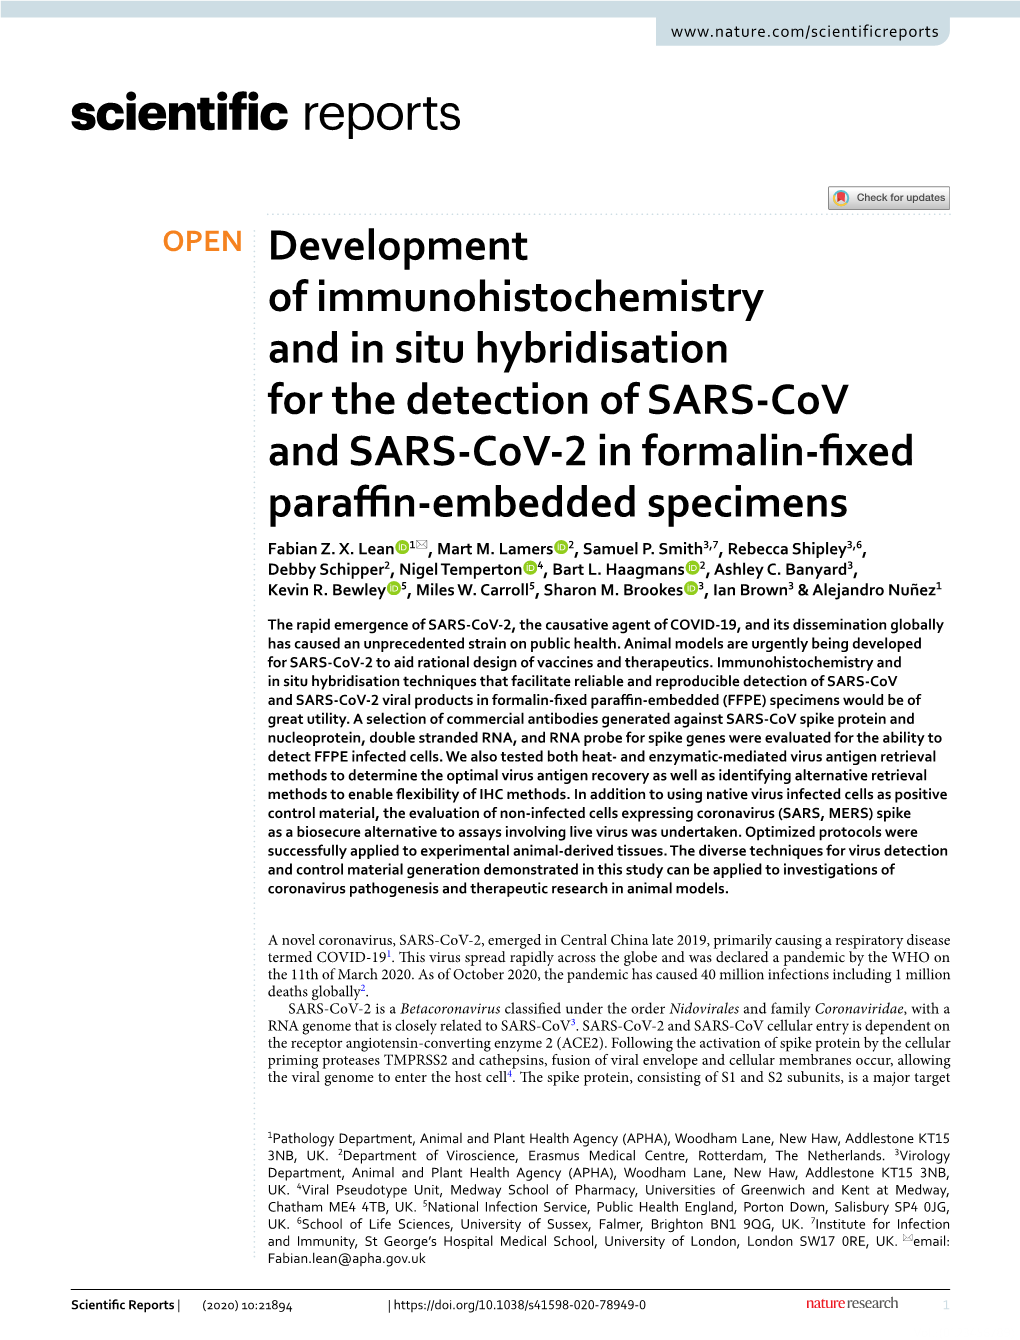 Development of Immunohistochemistry and in Situ Hybridisation for the Detection of SARS-Cov and SARS-Cov-2 in Formalin-Fixed Paraffin-Embedded Specimens